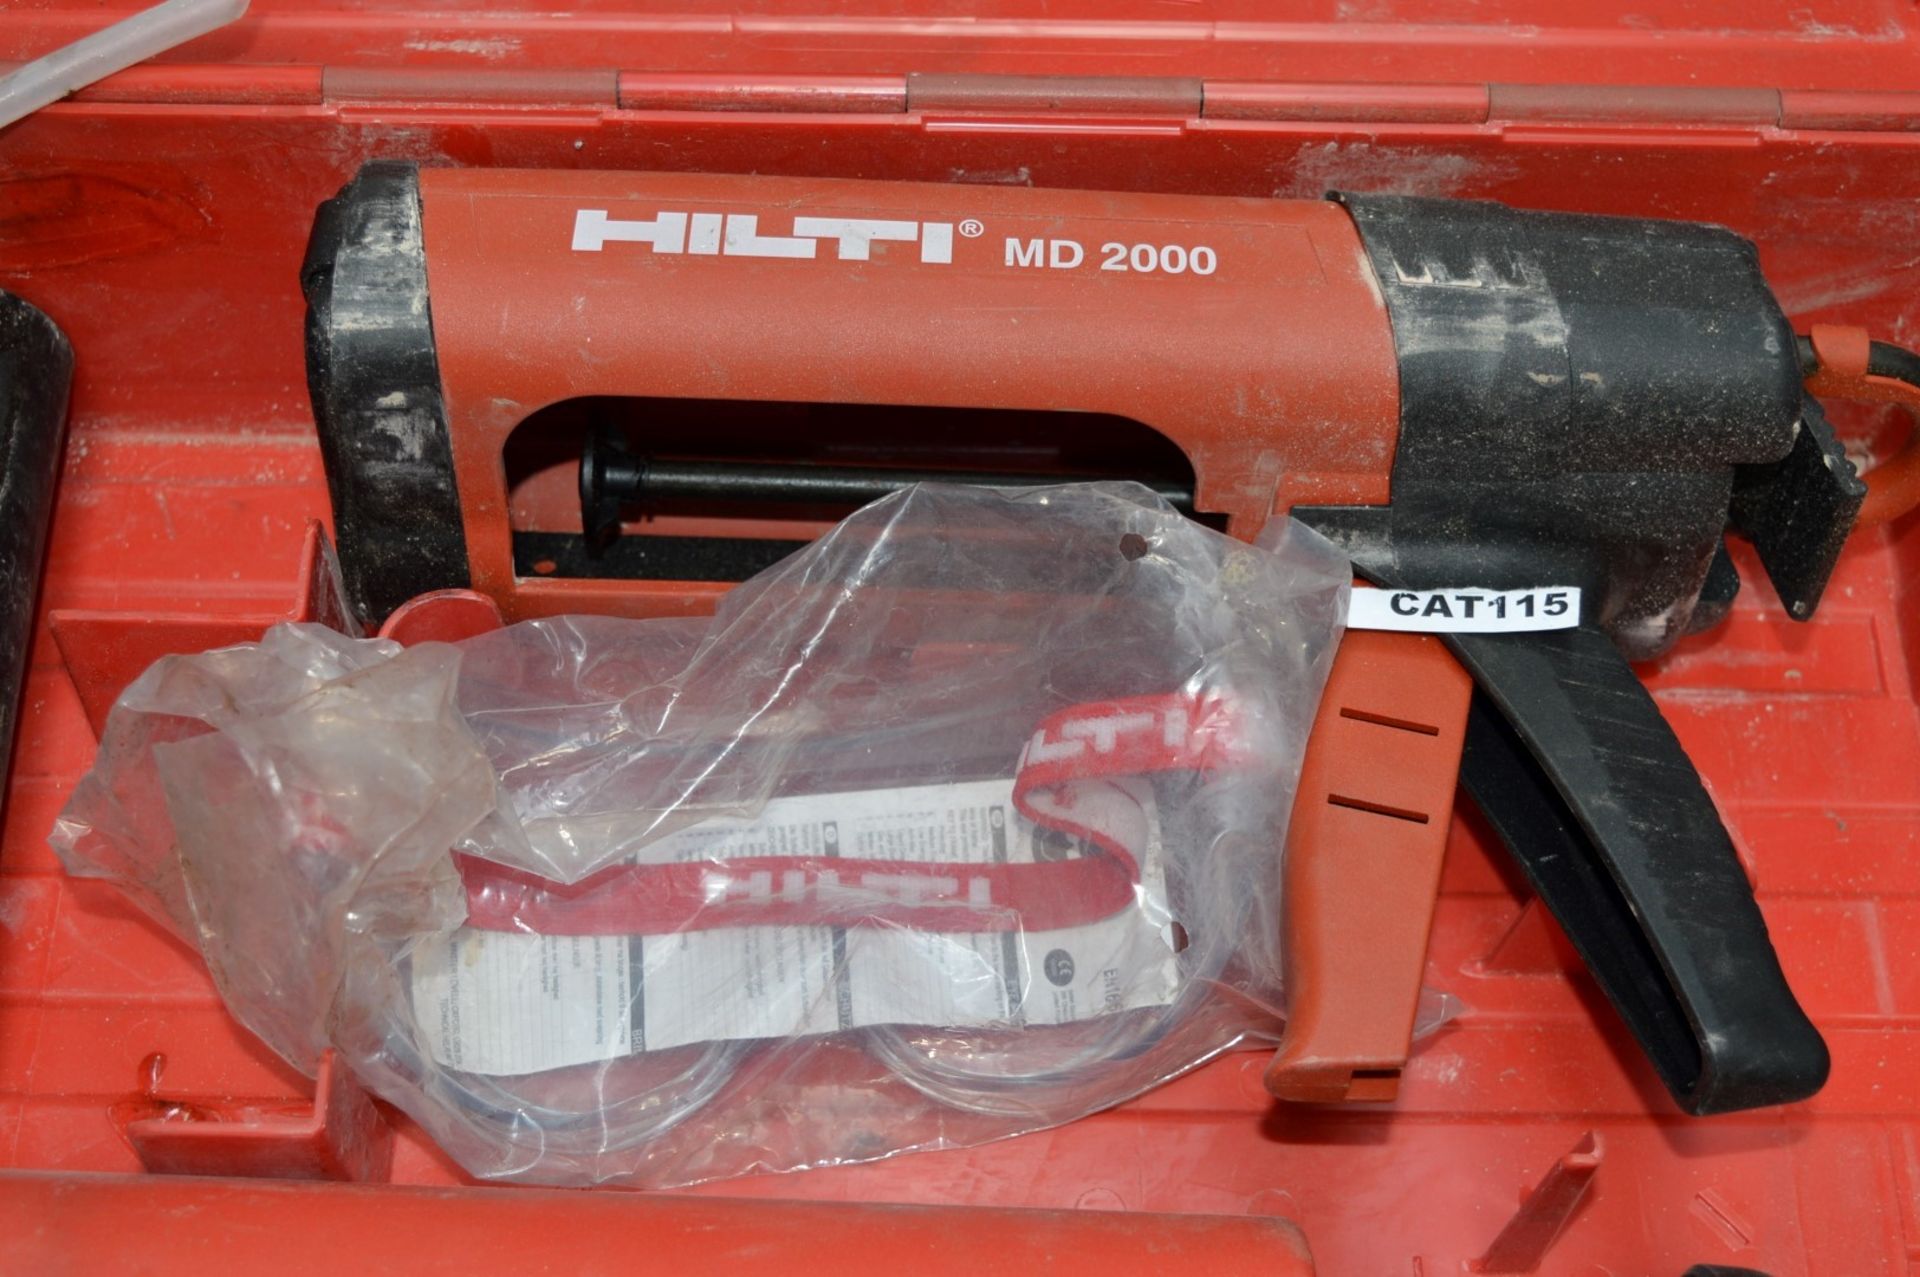 1 x Hilti MD2000 Manual HIT Adhesive Dispenser With Case, Pump, Brushes and Goggles - CL300 - Ref - Image 4 of 4